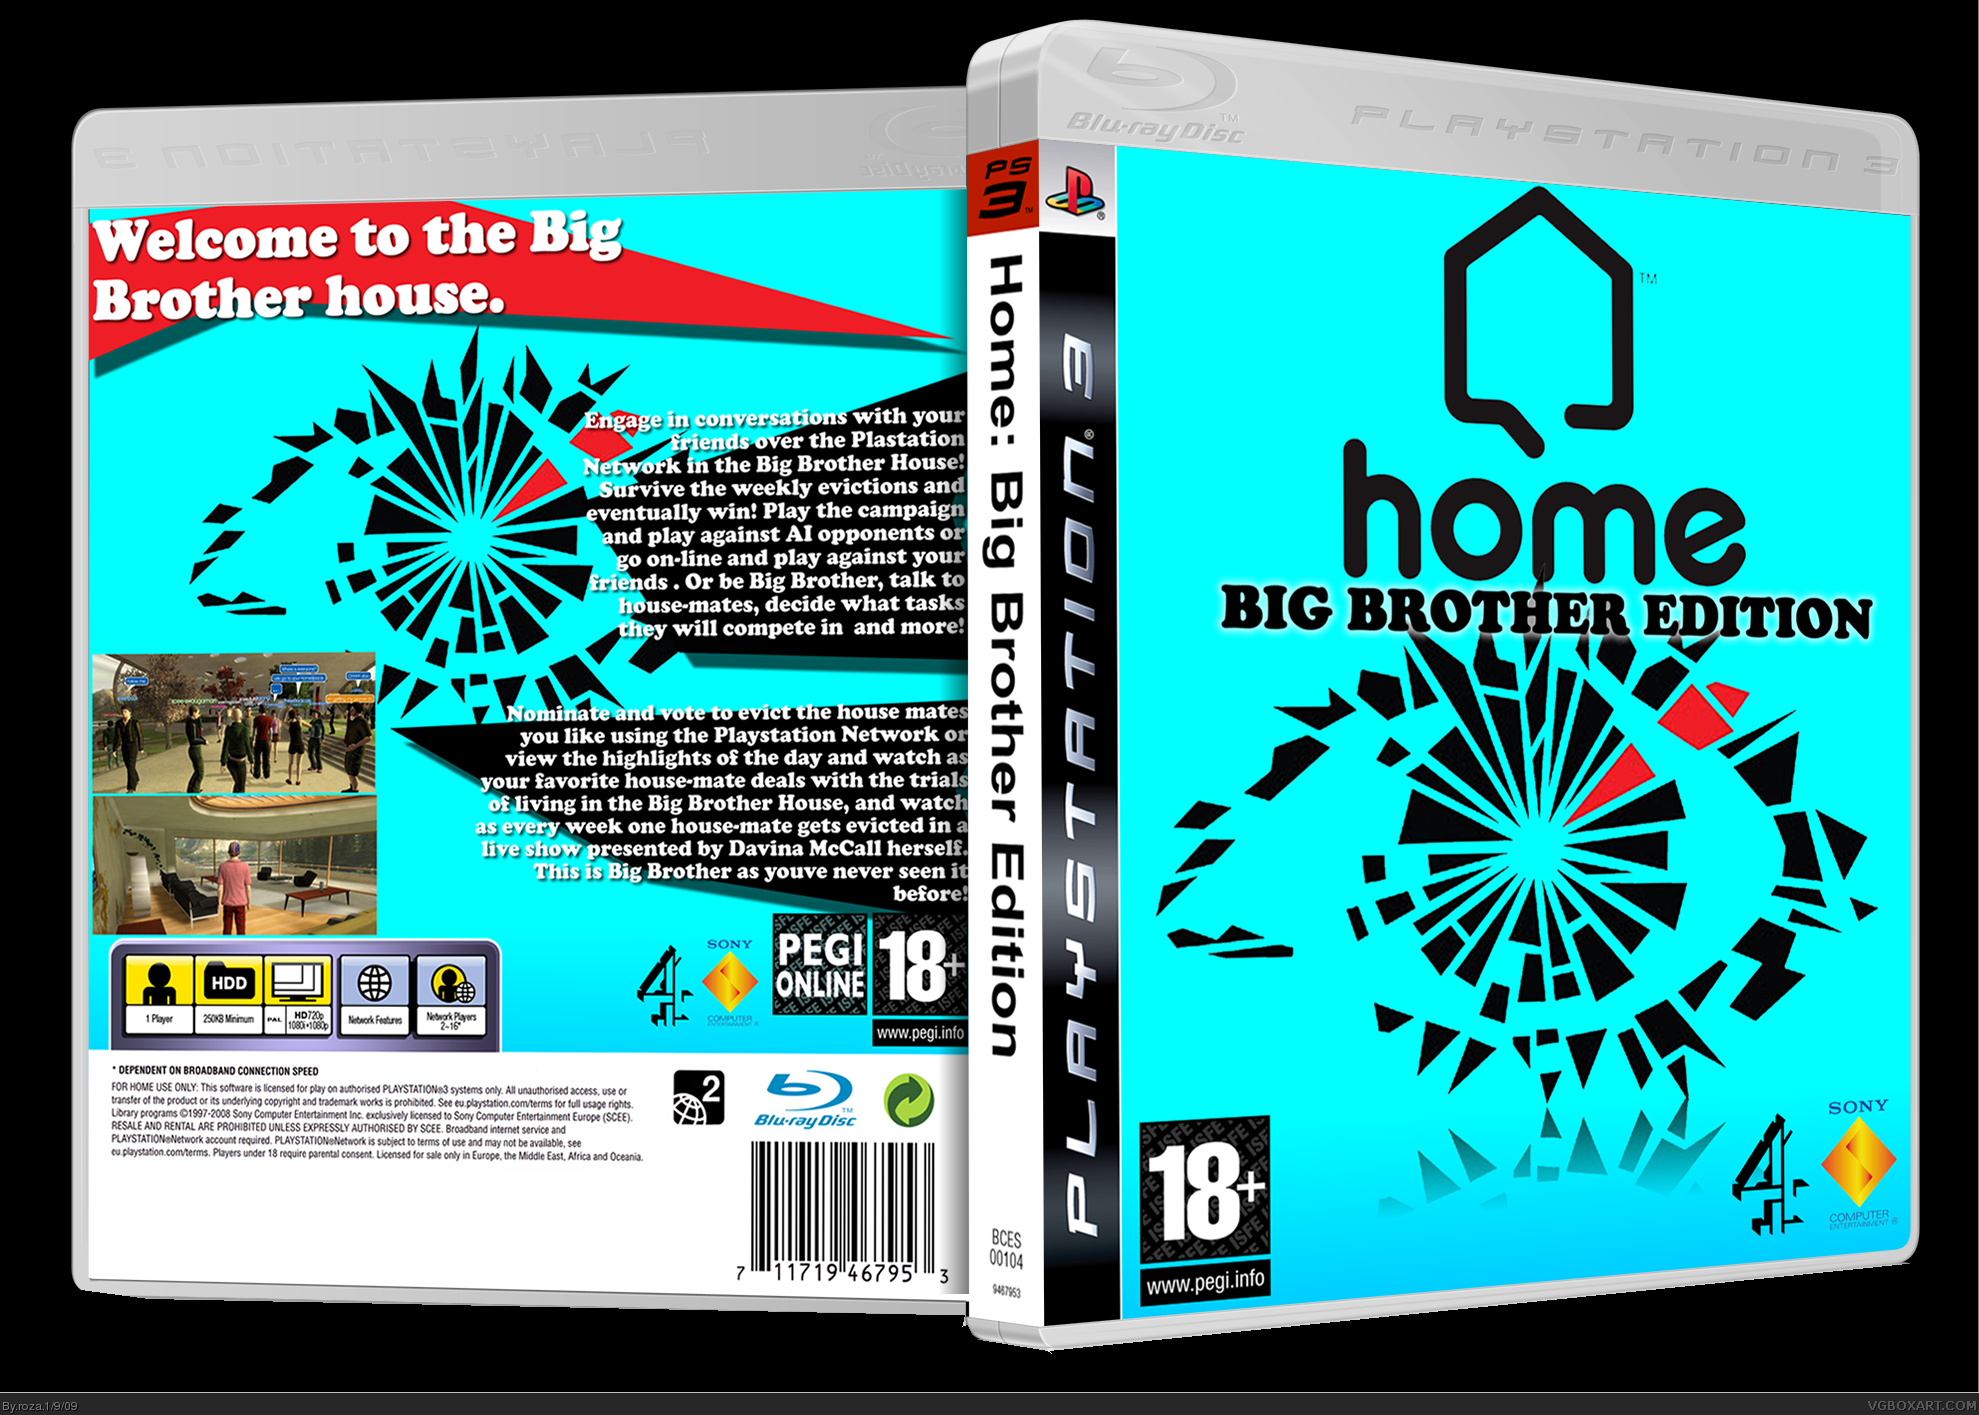 Home: Big Brother Edition box cover